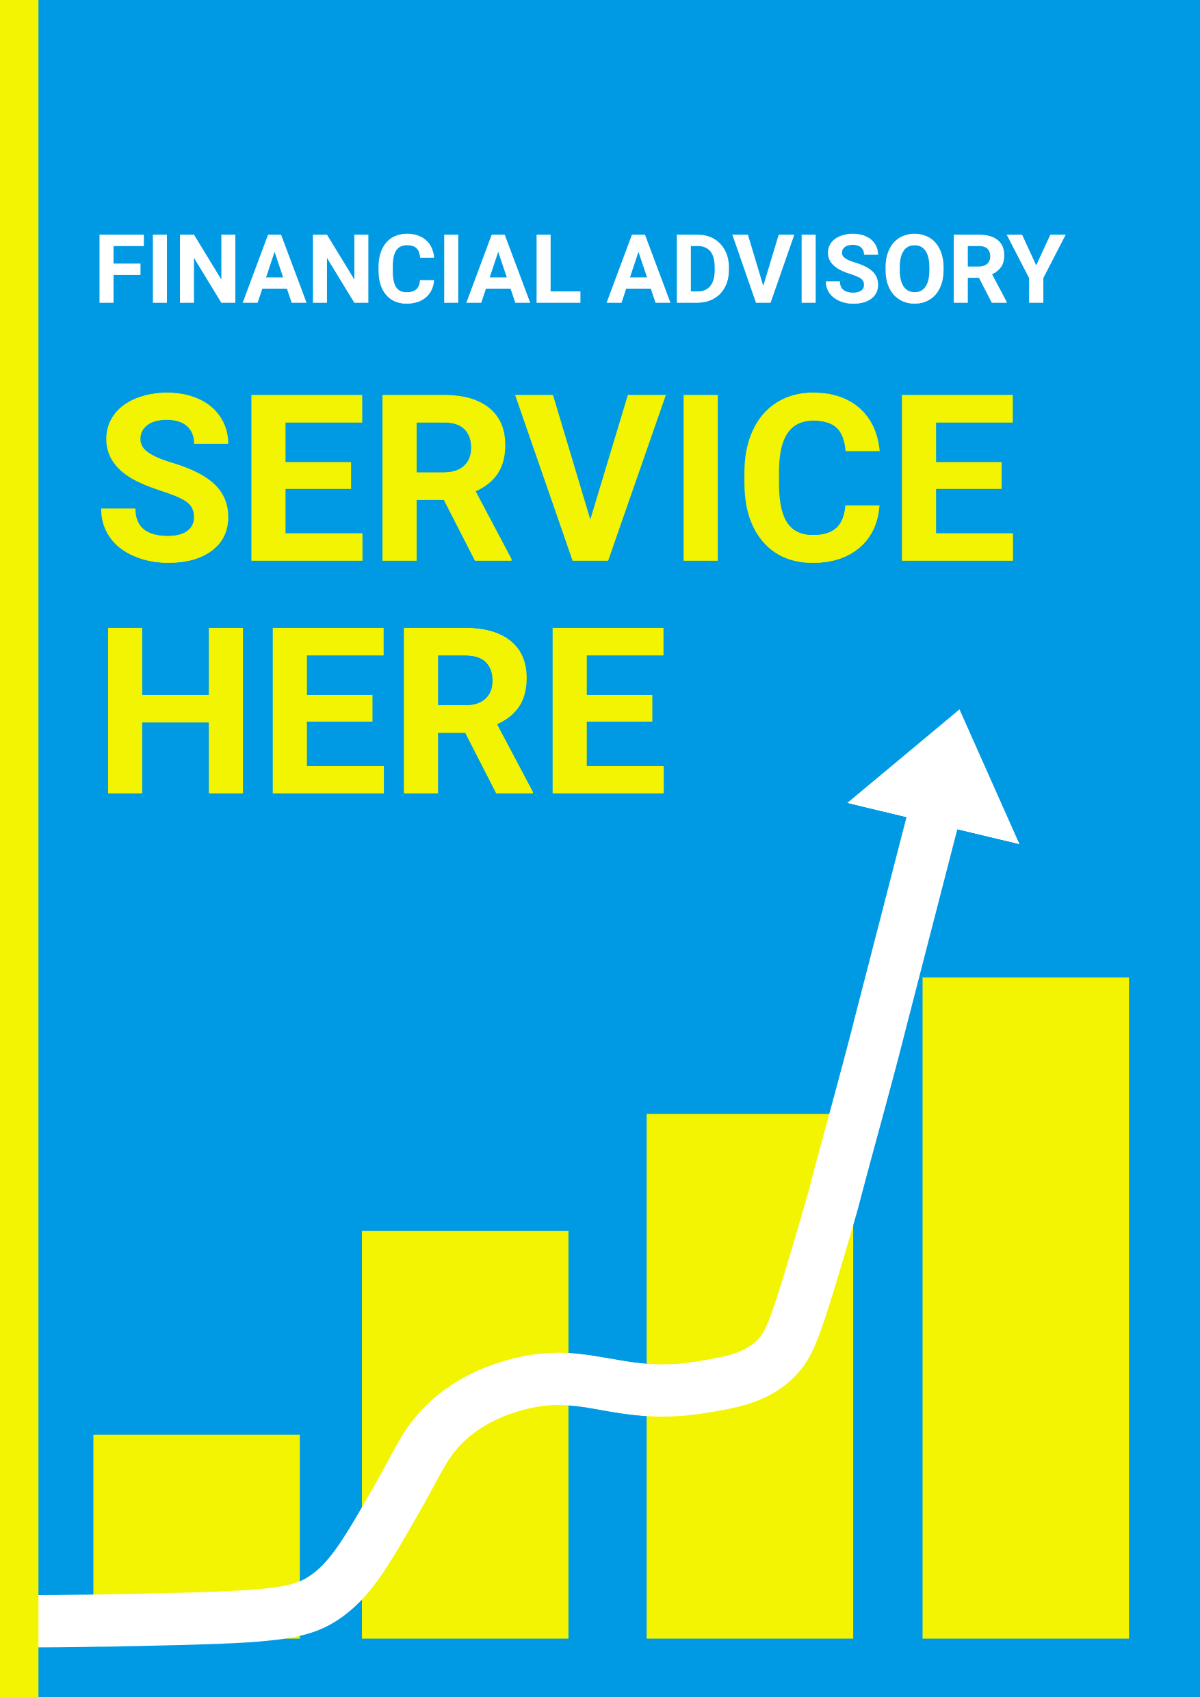 Financial Advisory Services Here Signage Template